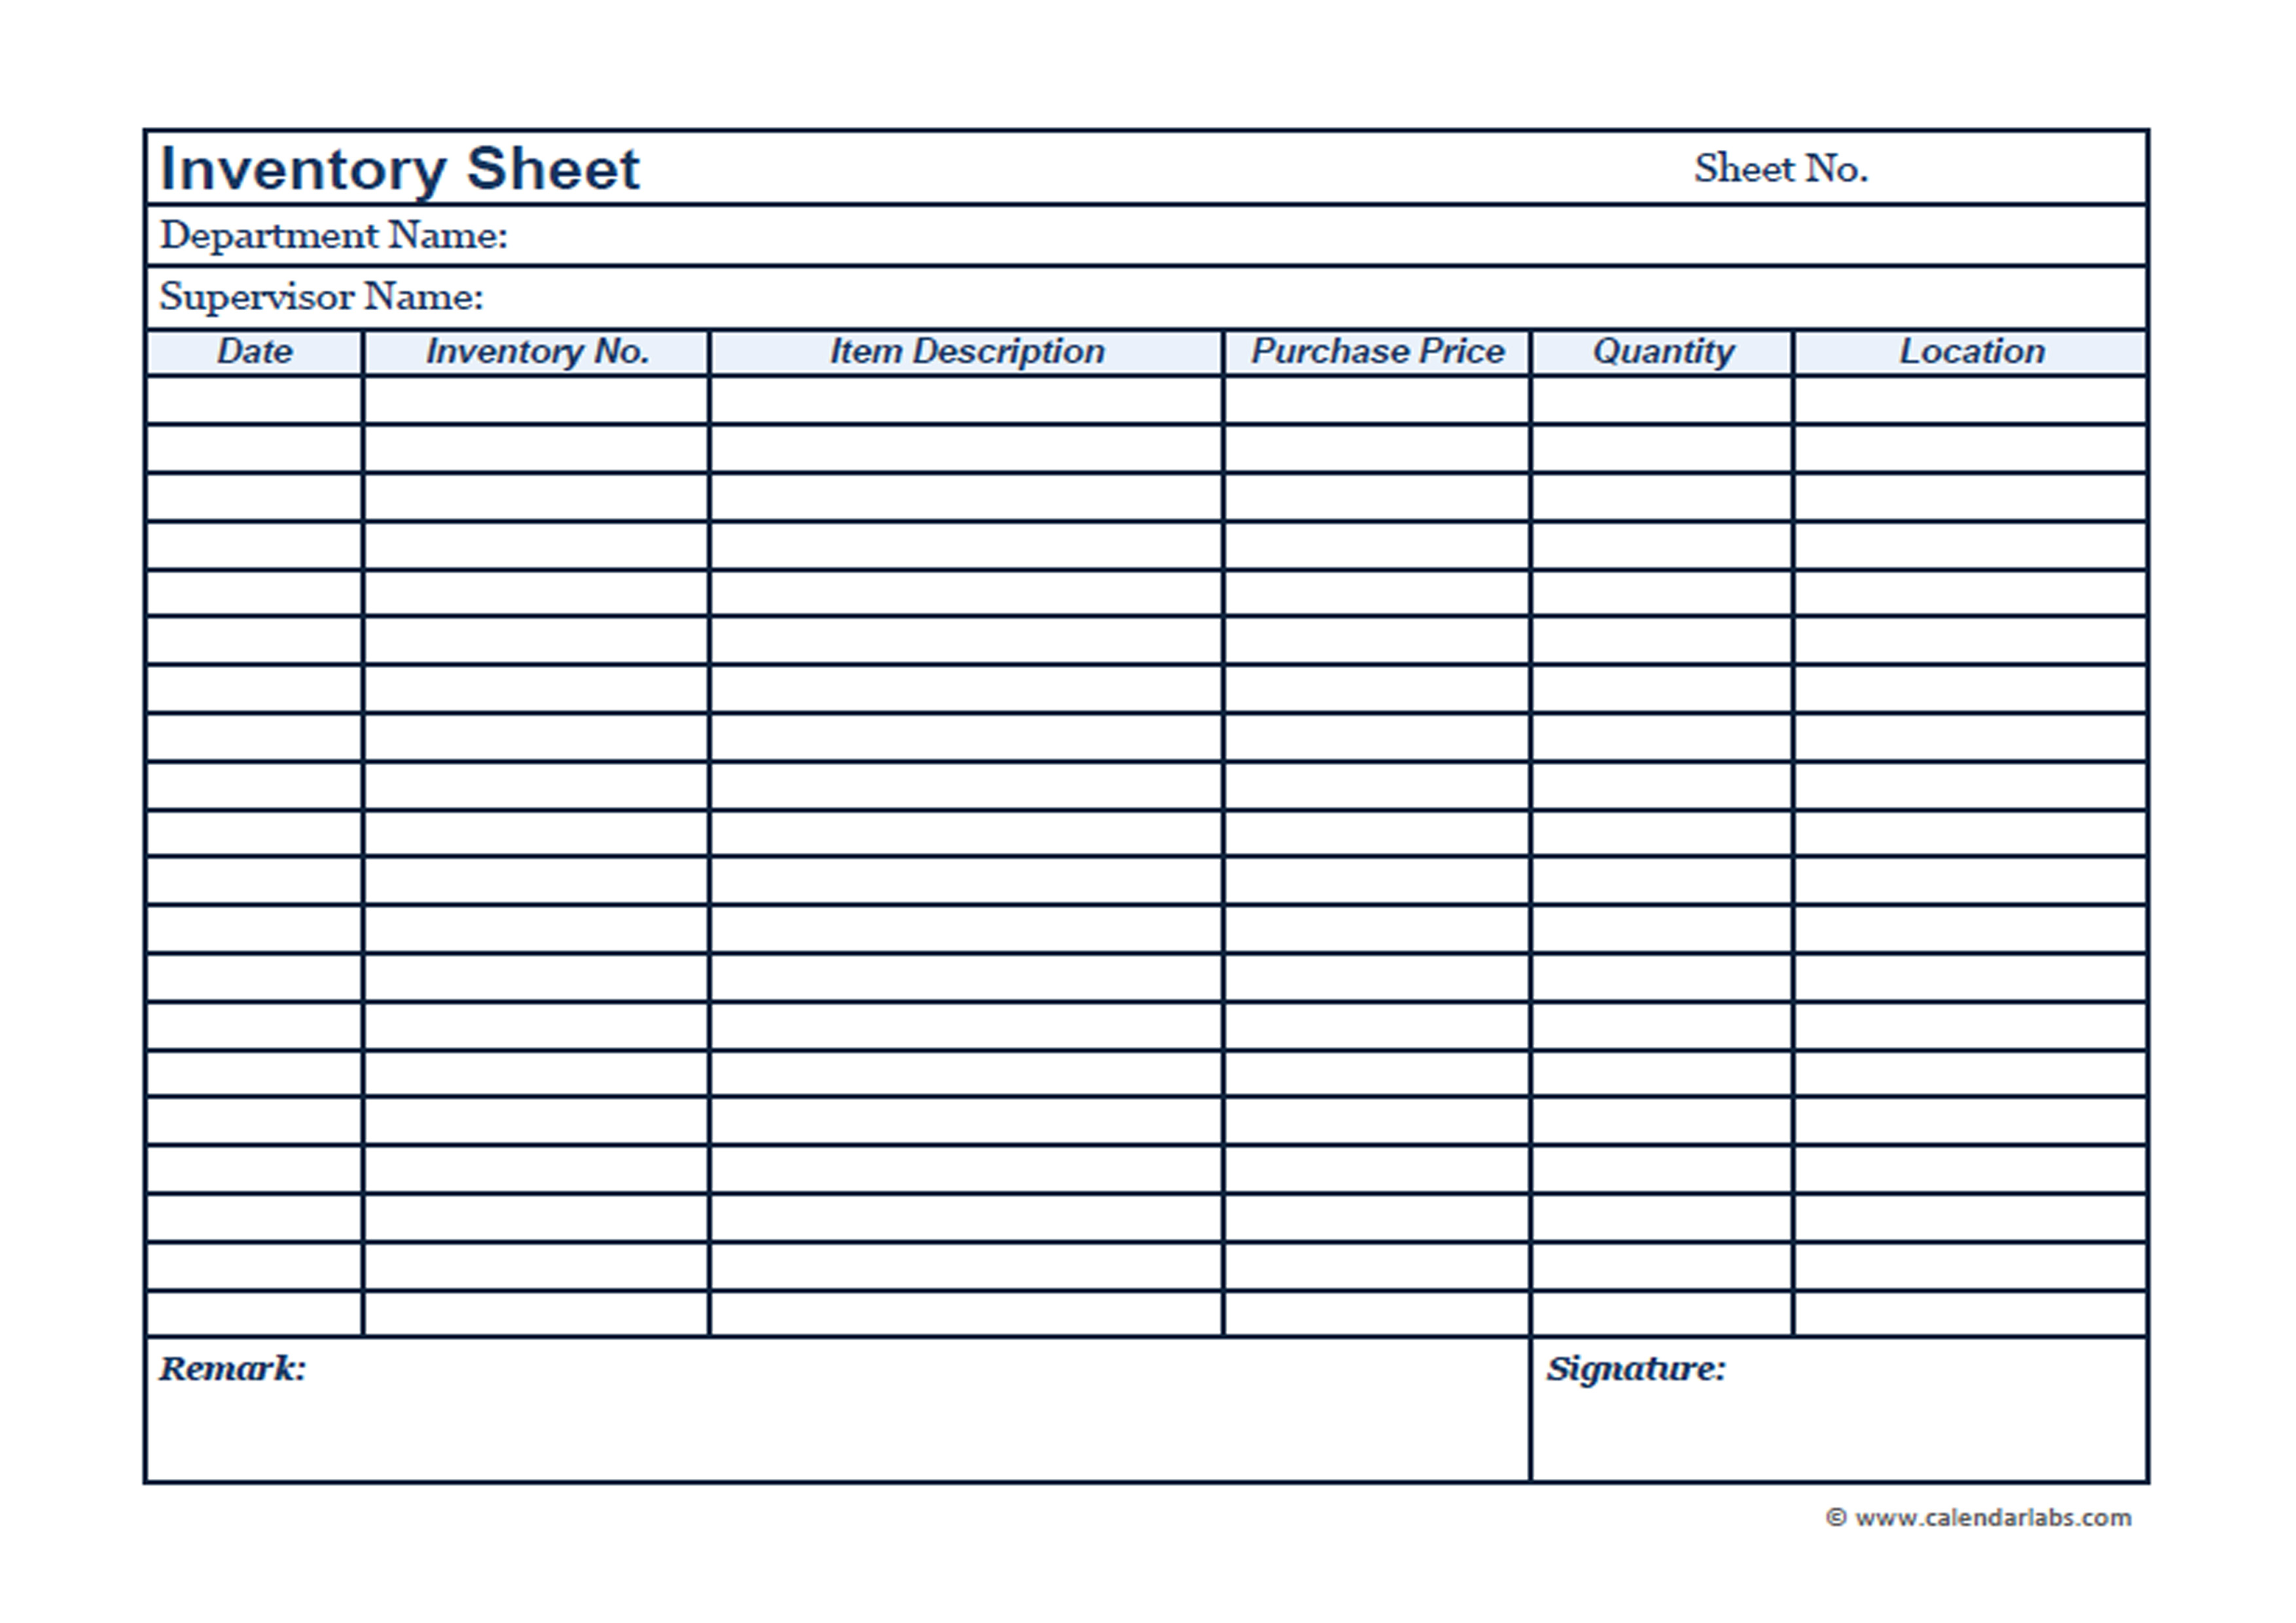 inventory-printable-template